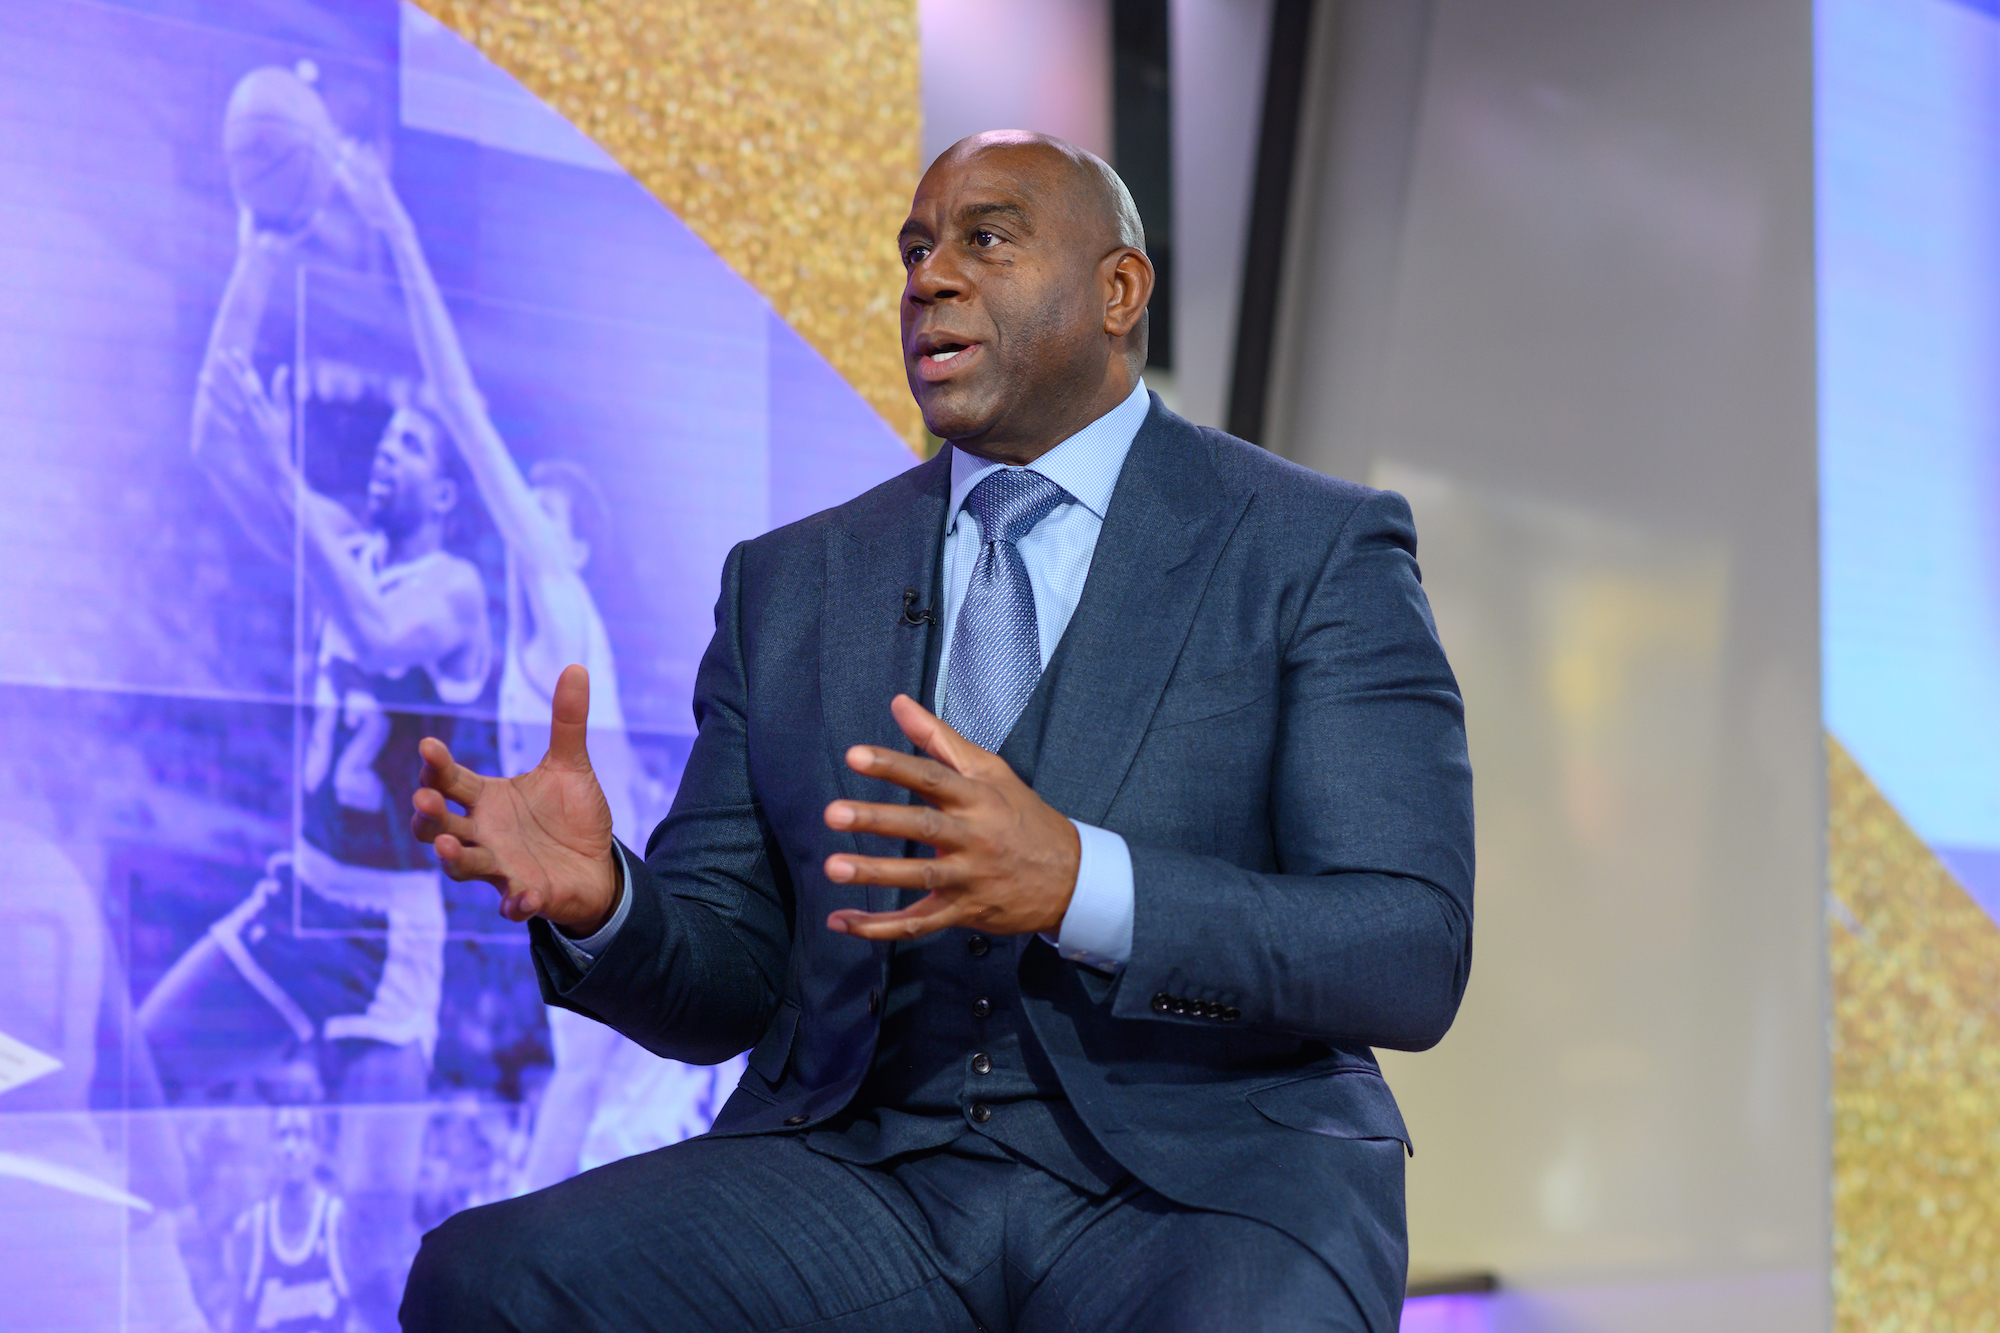 Magic Johnson's professional life began in junior high school, when he worked as a janitor.